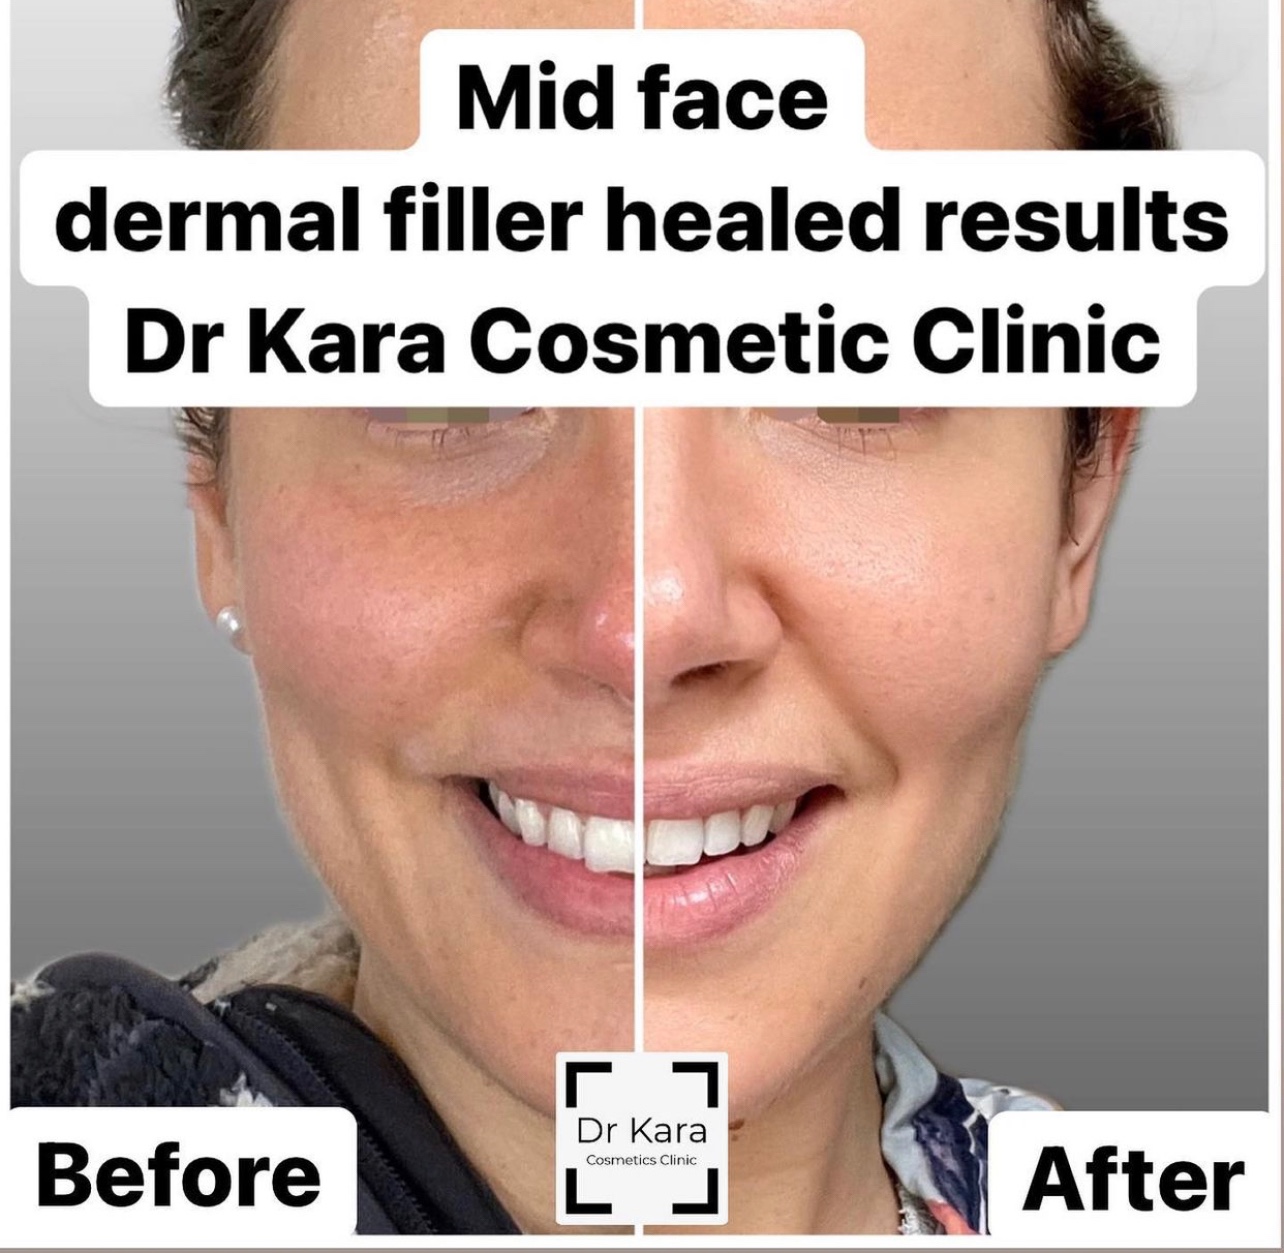 Dr Kara Cosmetic Clinic- Mid face tear trough and cheek dermal filler healed results